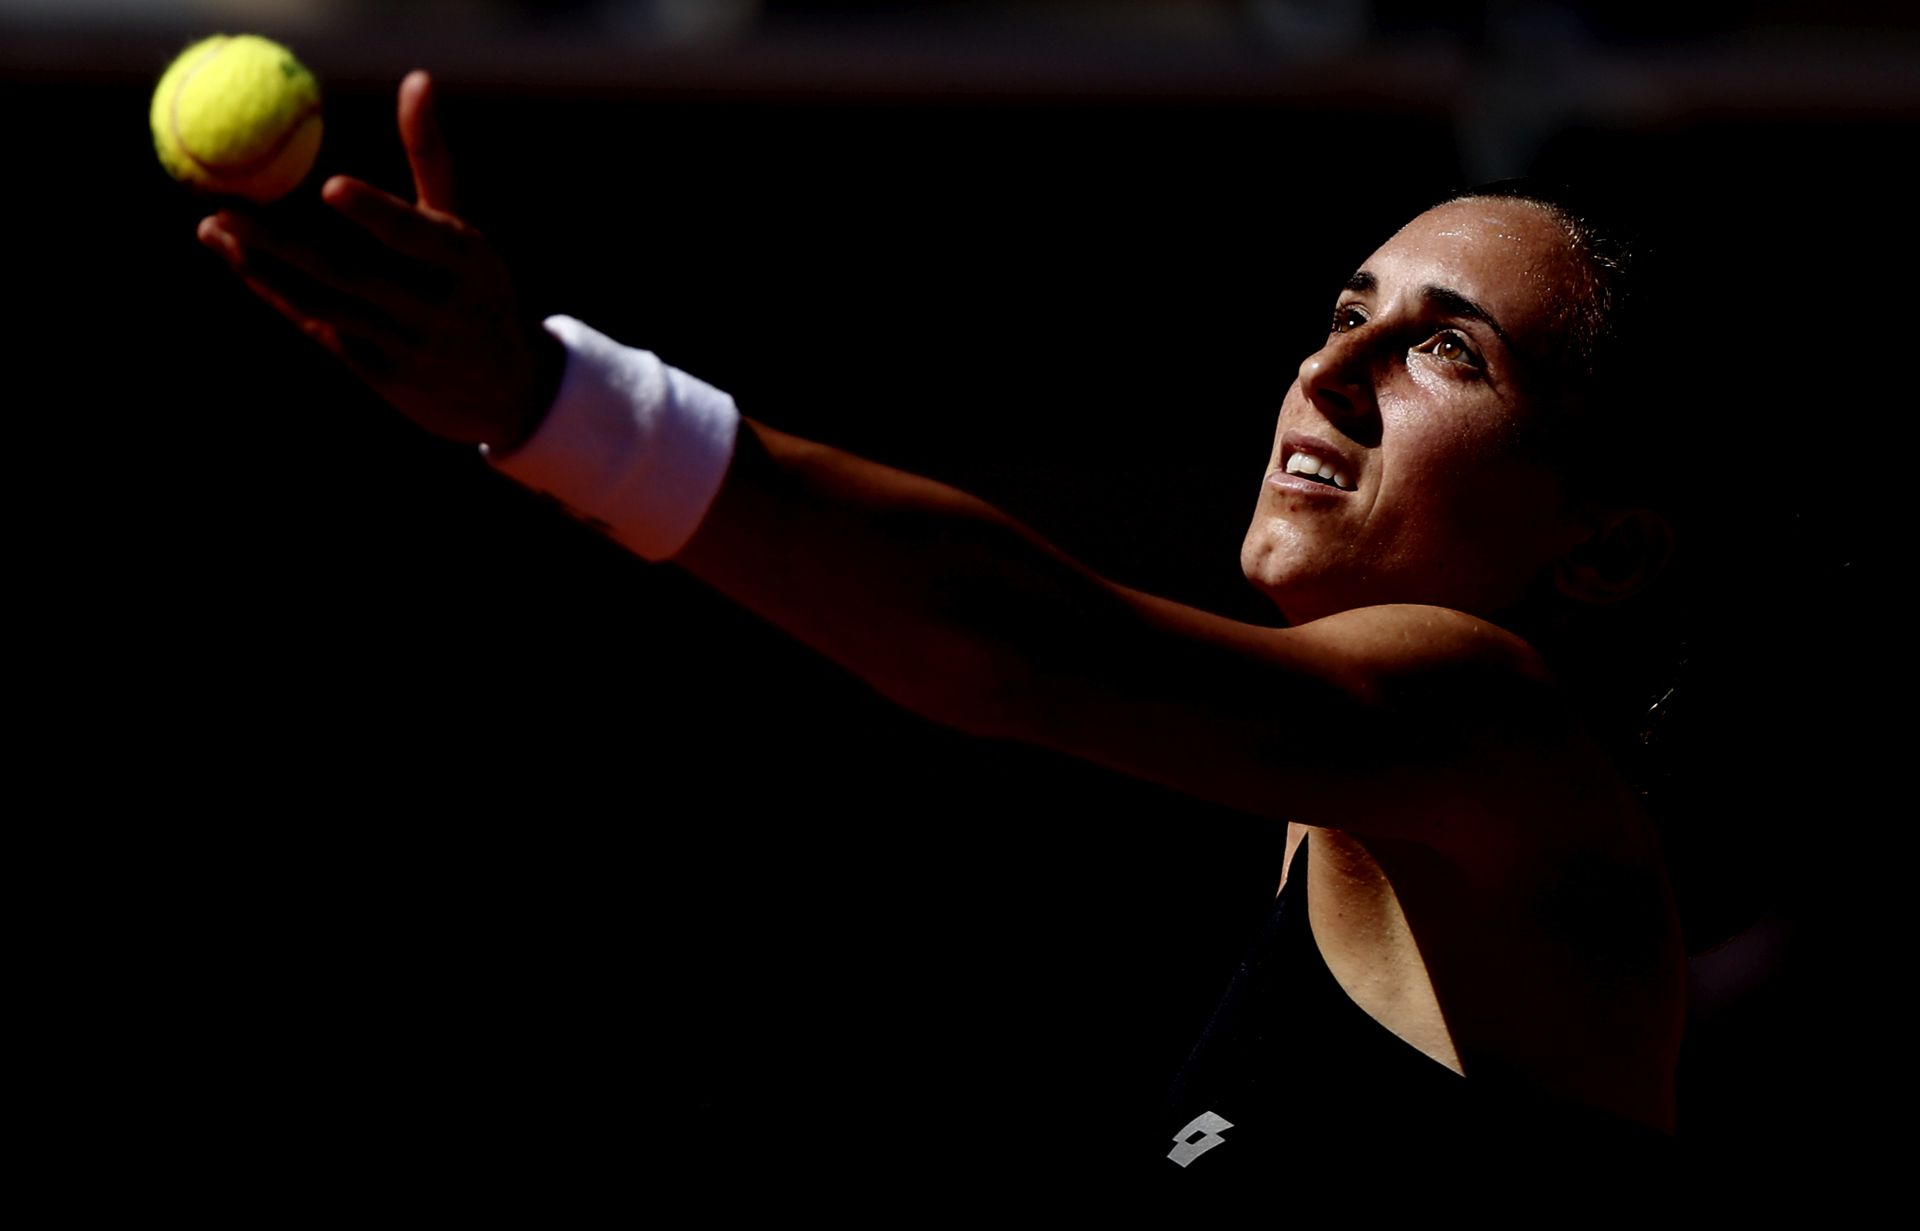 epa07619572 Petra Martic of Croatia plays Kaia Kanepi of Estonia during their women’s round of 16 match during the French Open tennis tournament at Roland Garros in Paris, France, 02 June 2019.  EPA/YOAN VALAT